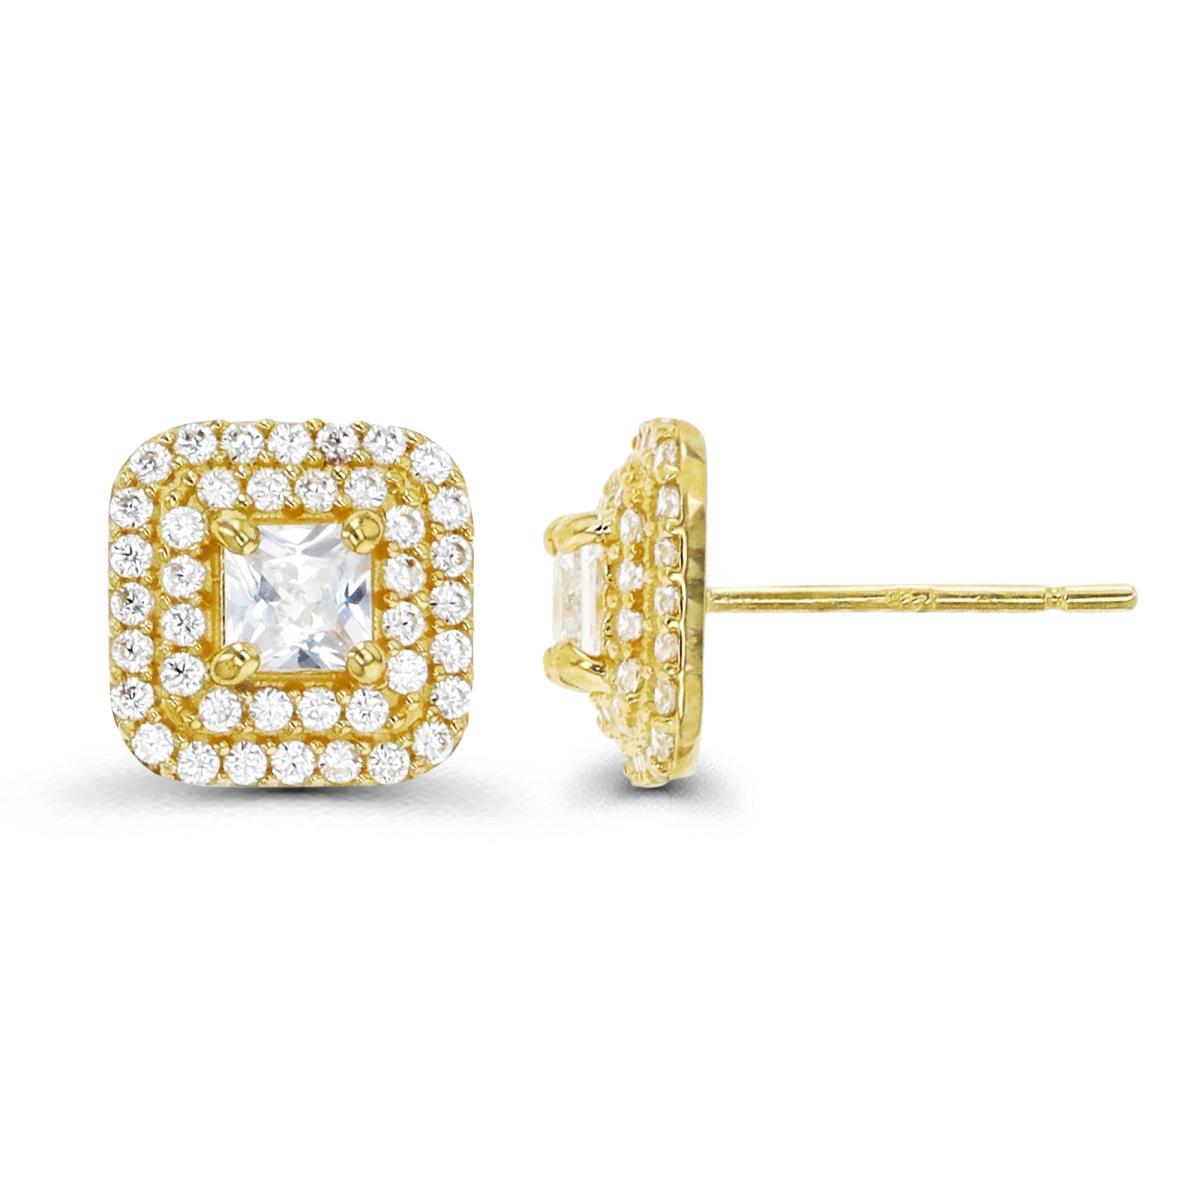 10K Gold Yellow & White CZ Square Cluster Stud Earring